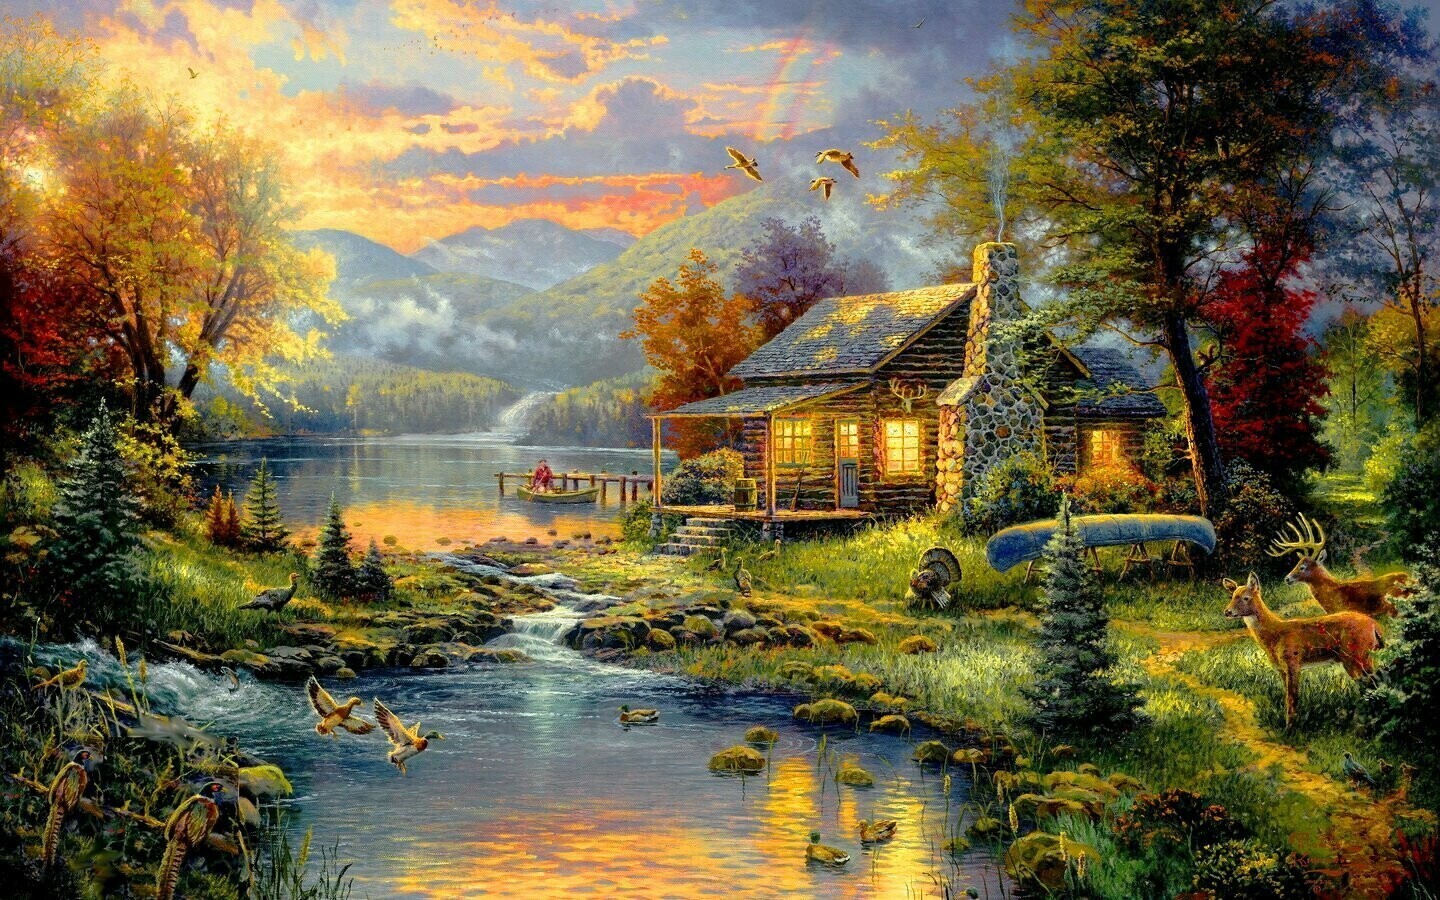 Scenery Artwork 02 - 61 x 91.5cm (poster size) Full Drill (square) Diamond Painting Kit - Currently in stock